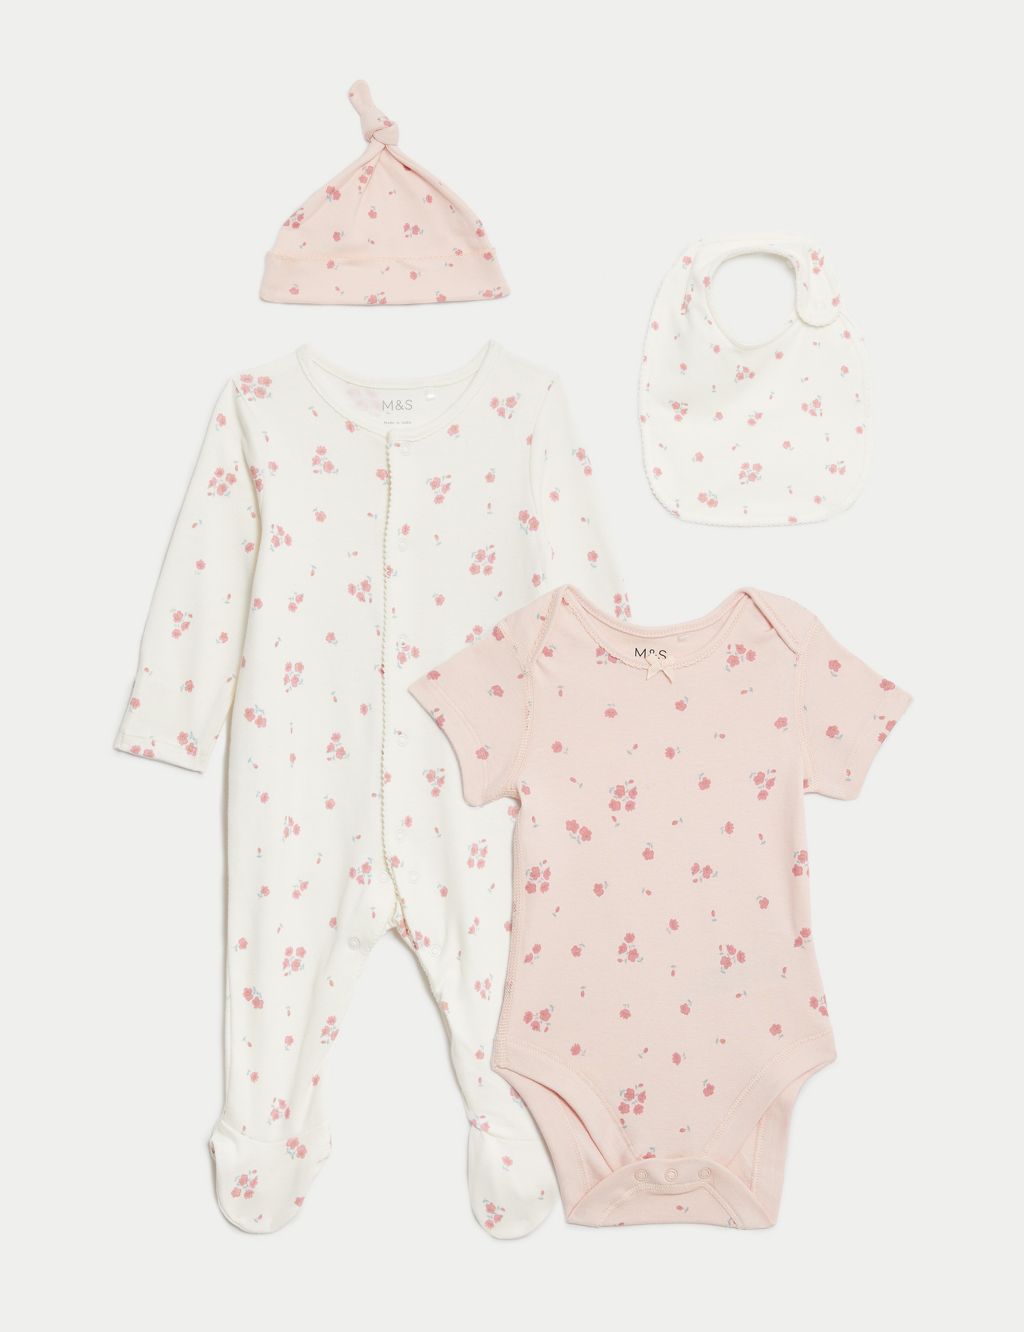 4pc Pure Cotton Floral Starter Set (7lbs-1 Yrs)